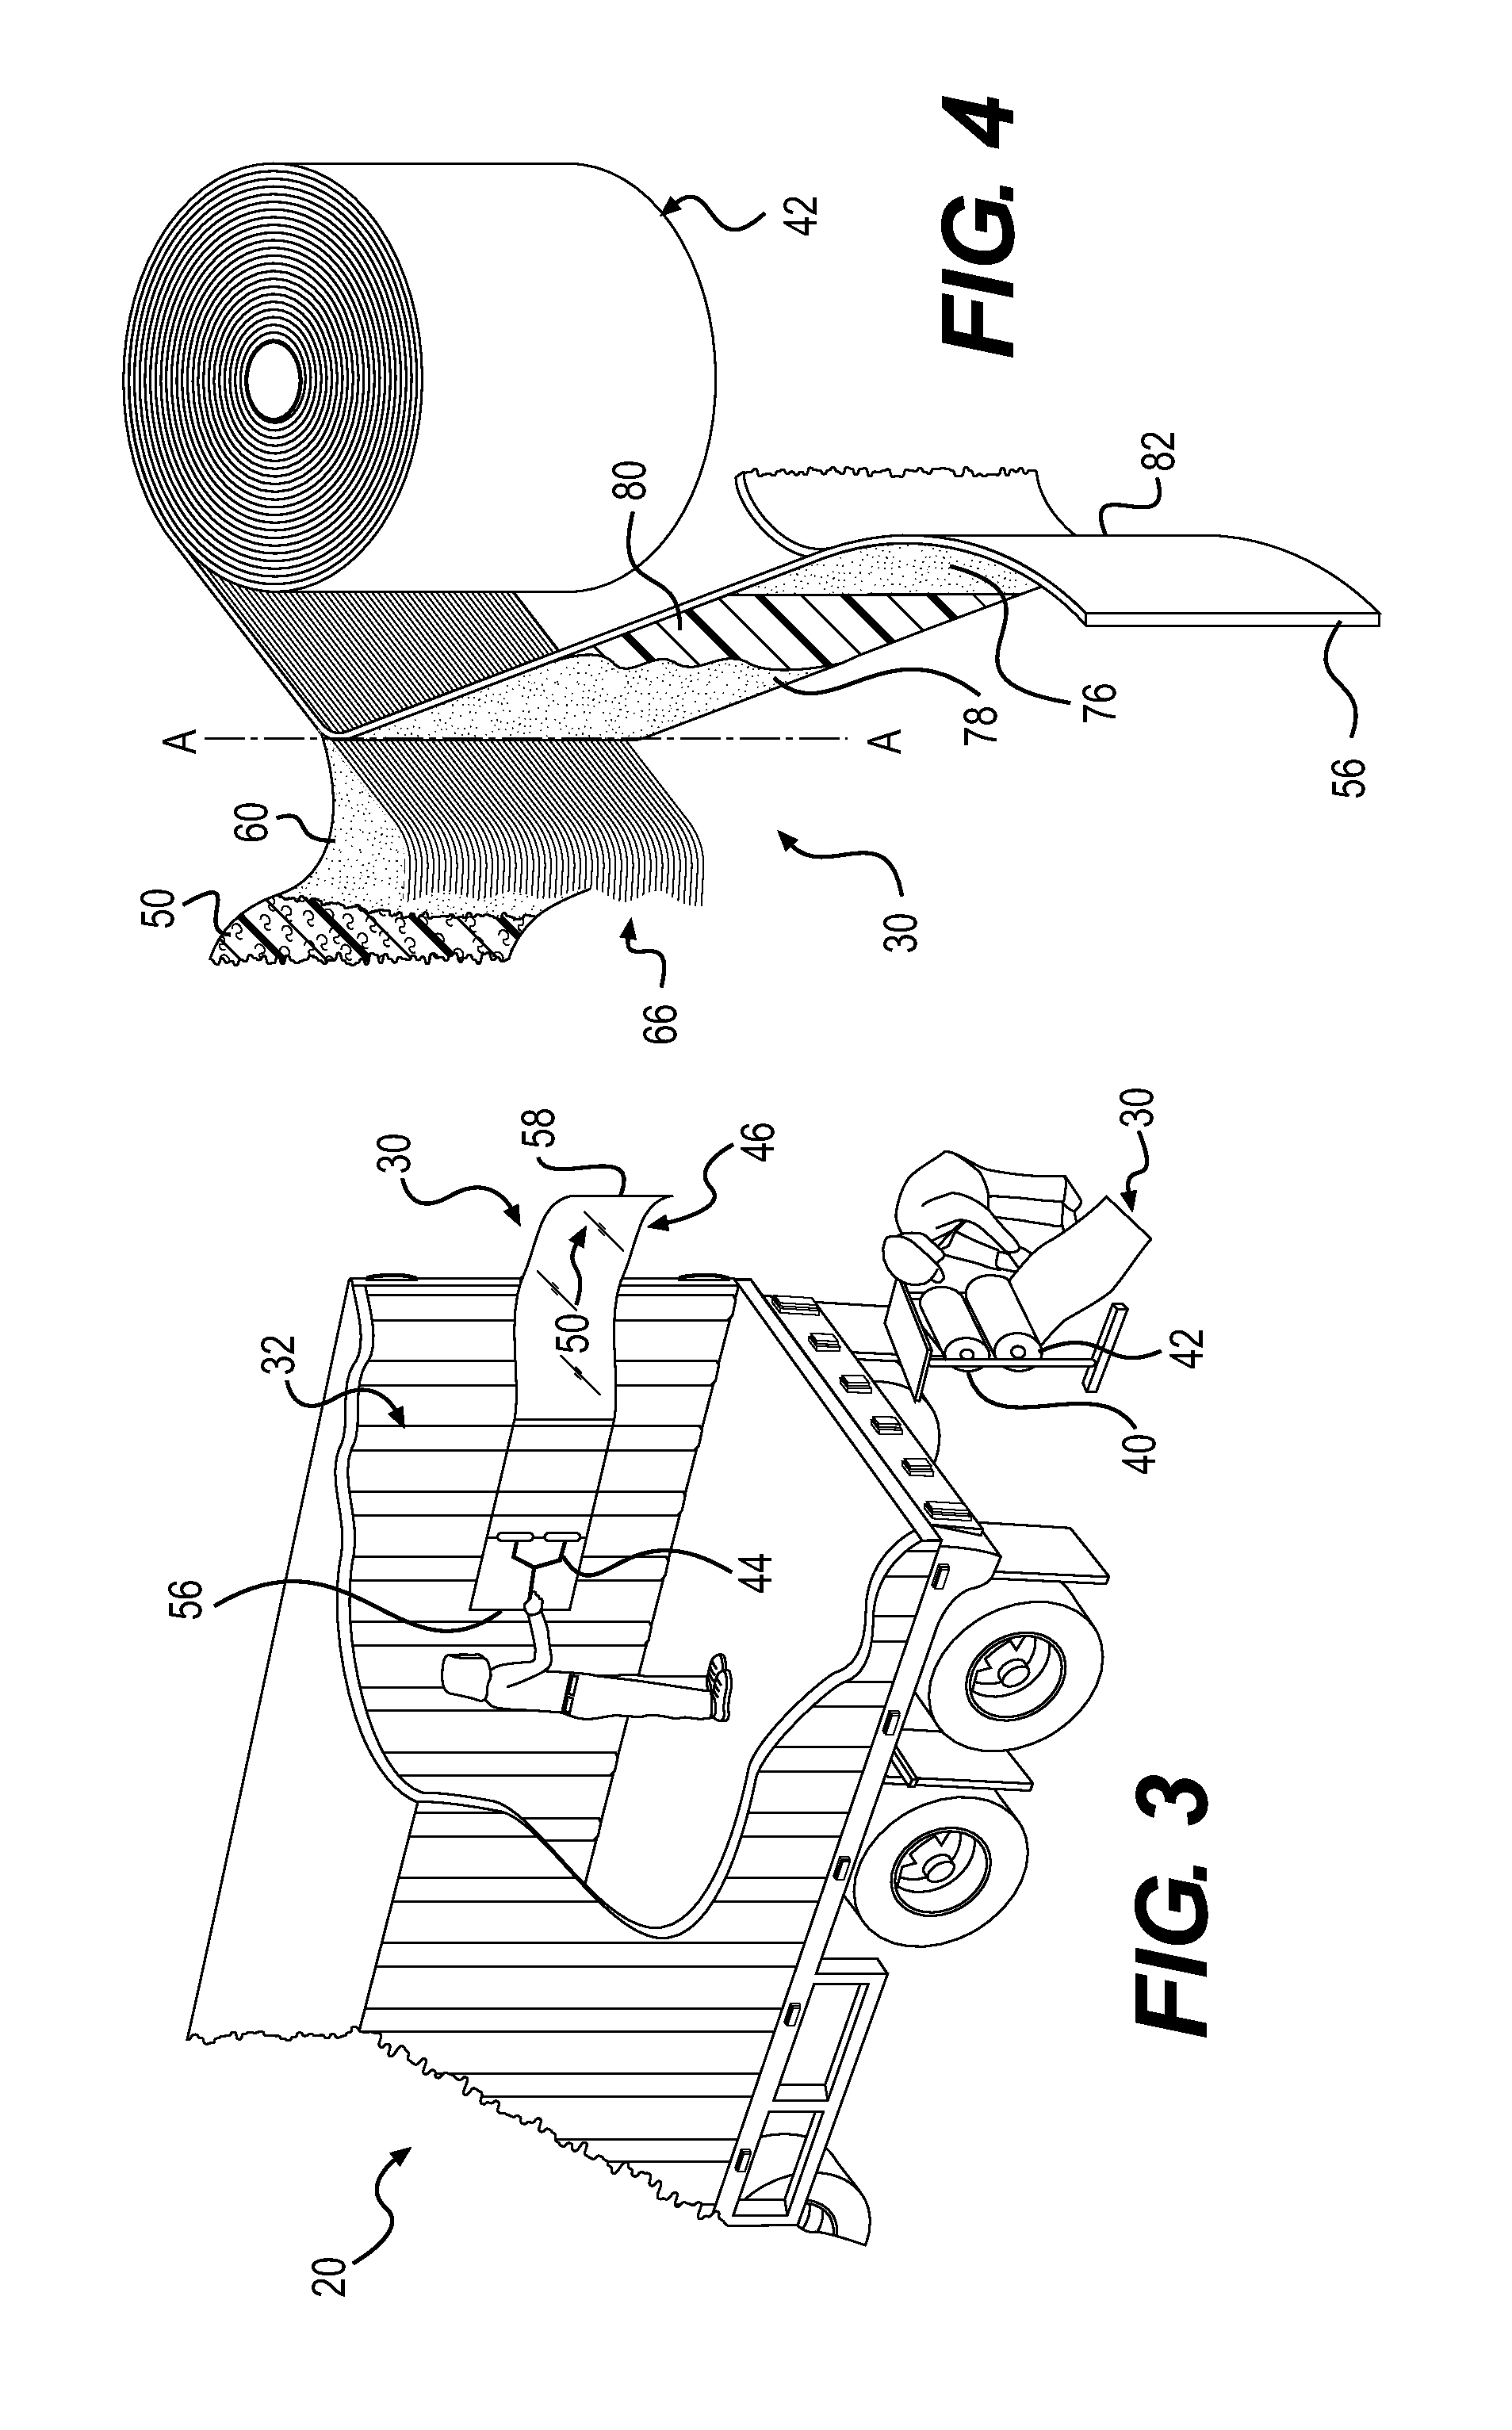 Cargo restraint system with enhanced reinforcement content